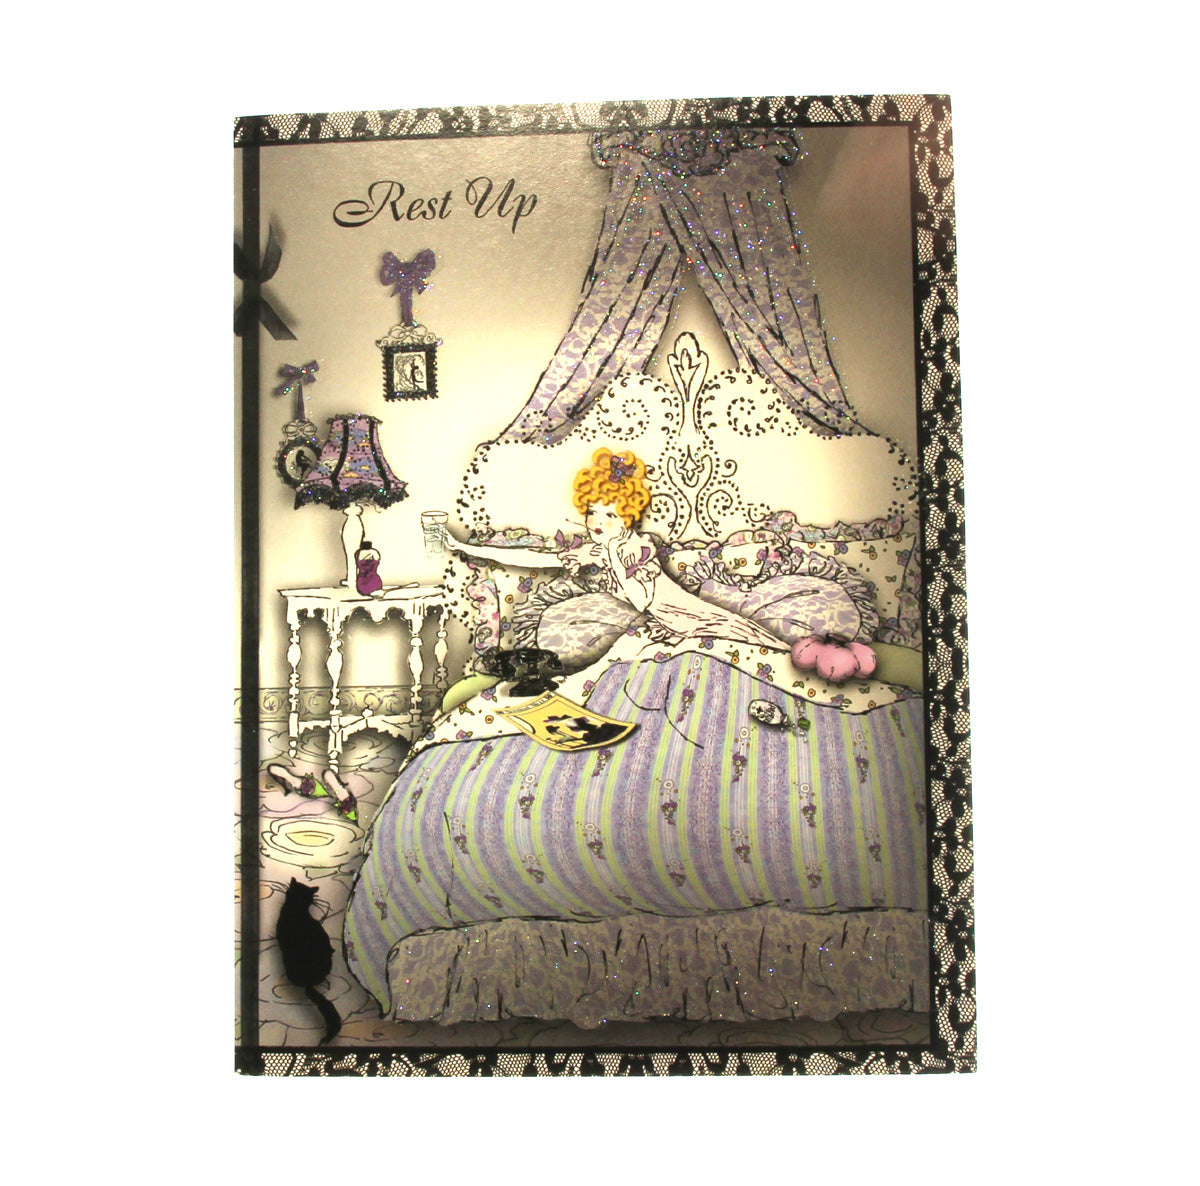 Get Well Card: Rest Up, Frou-Frou